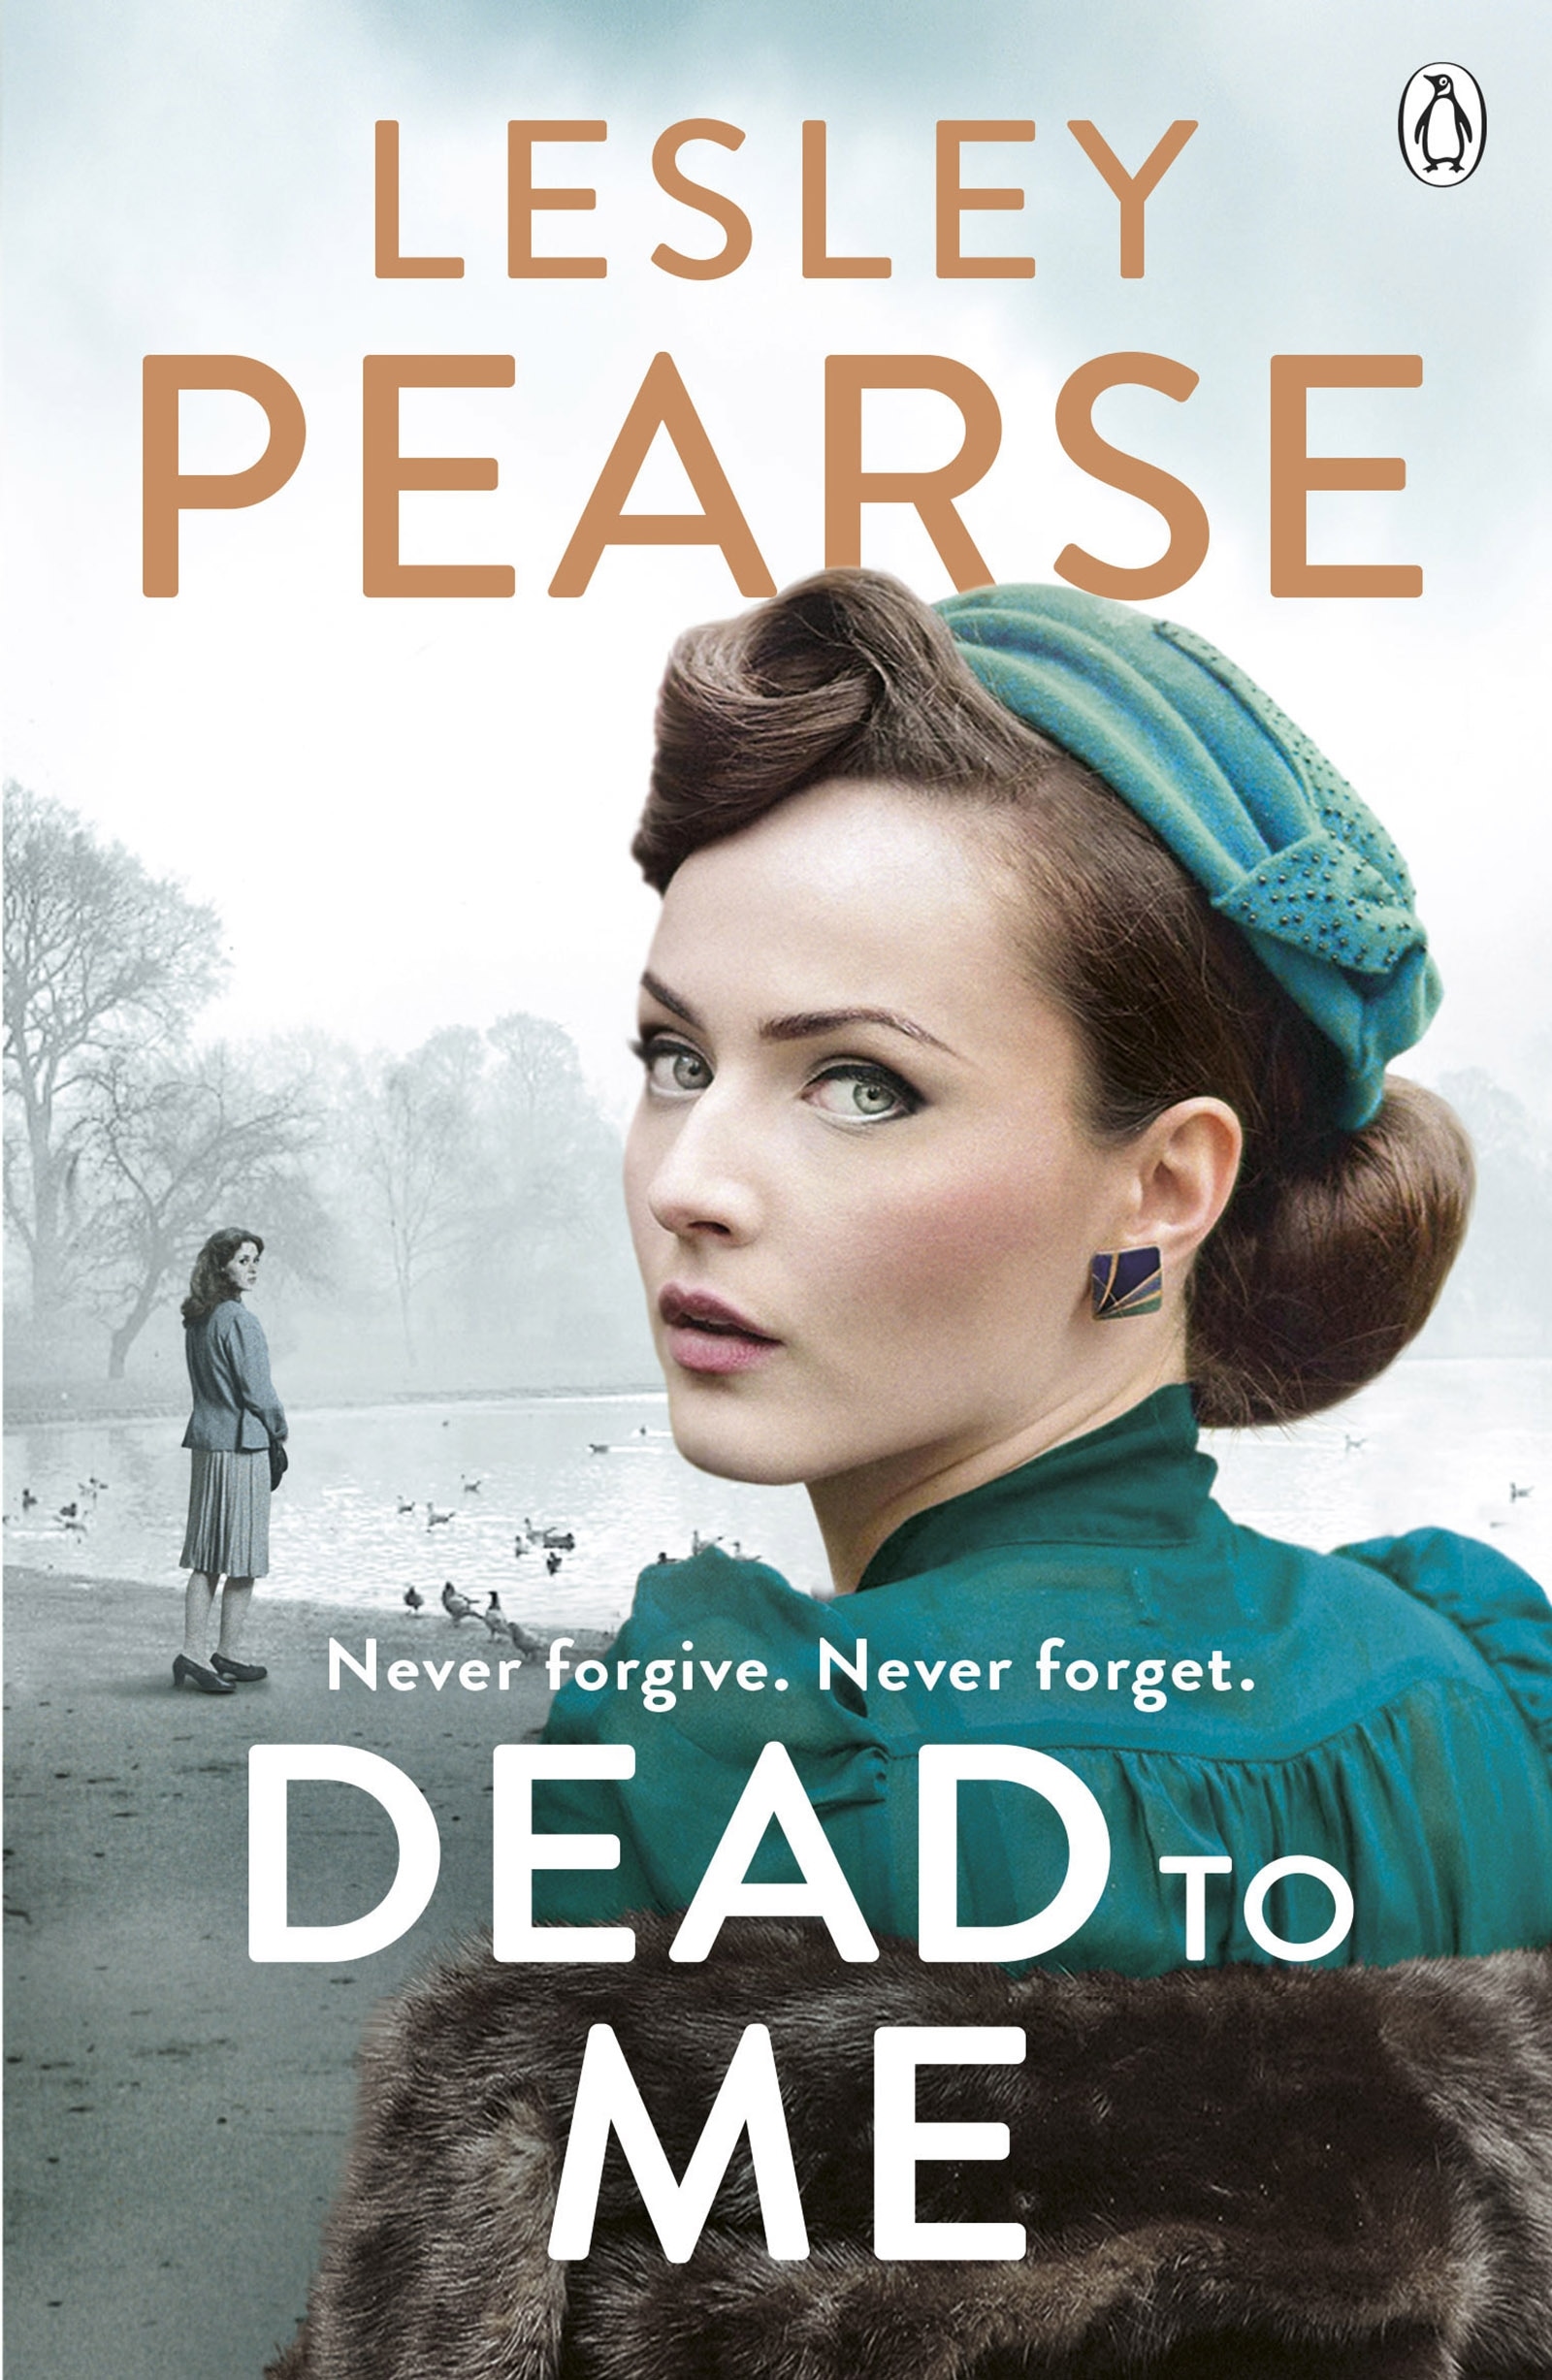 Book “Dead to Me” by Lesley Pearse — May 4, 2017